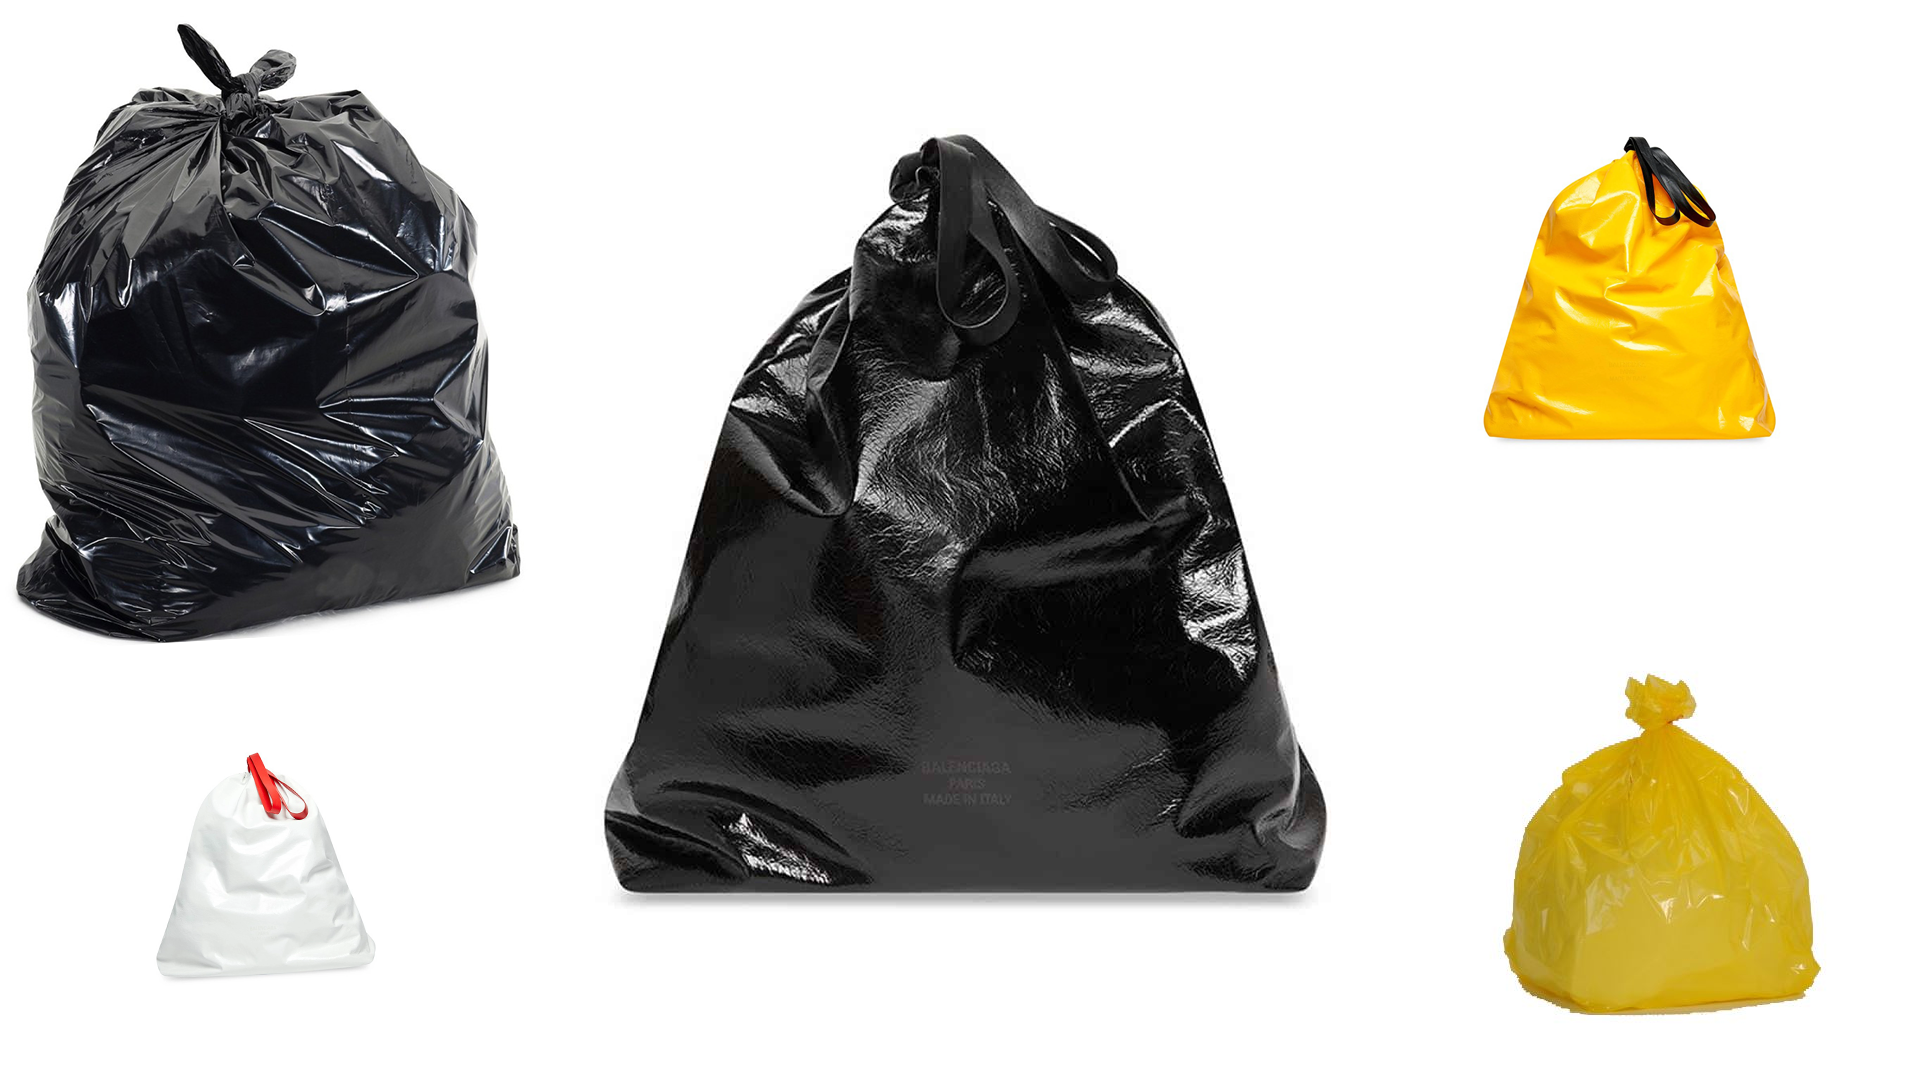 Balenciaga Just Released A Literal Trash Bag That Costs Over $1,790